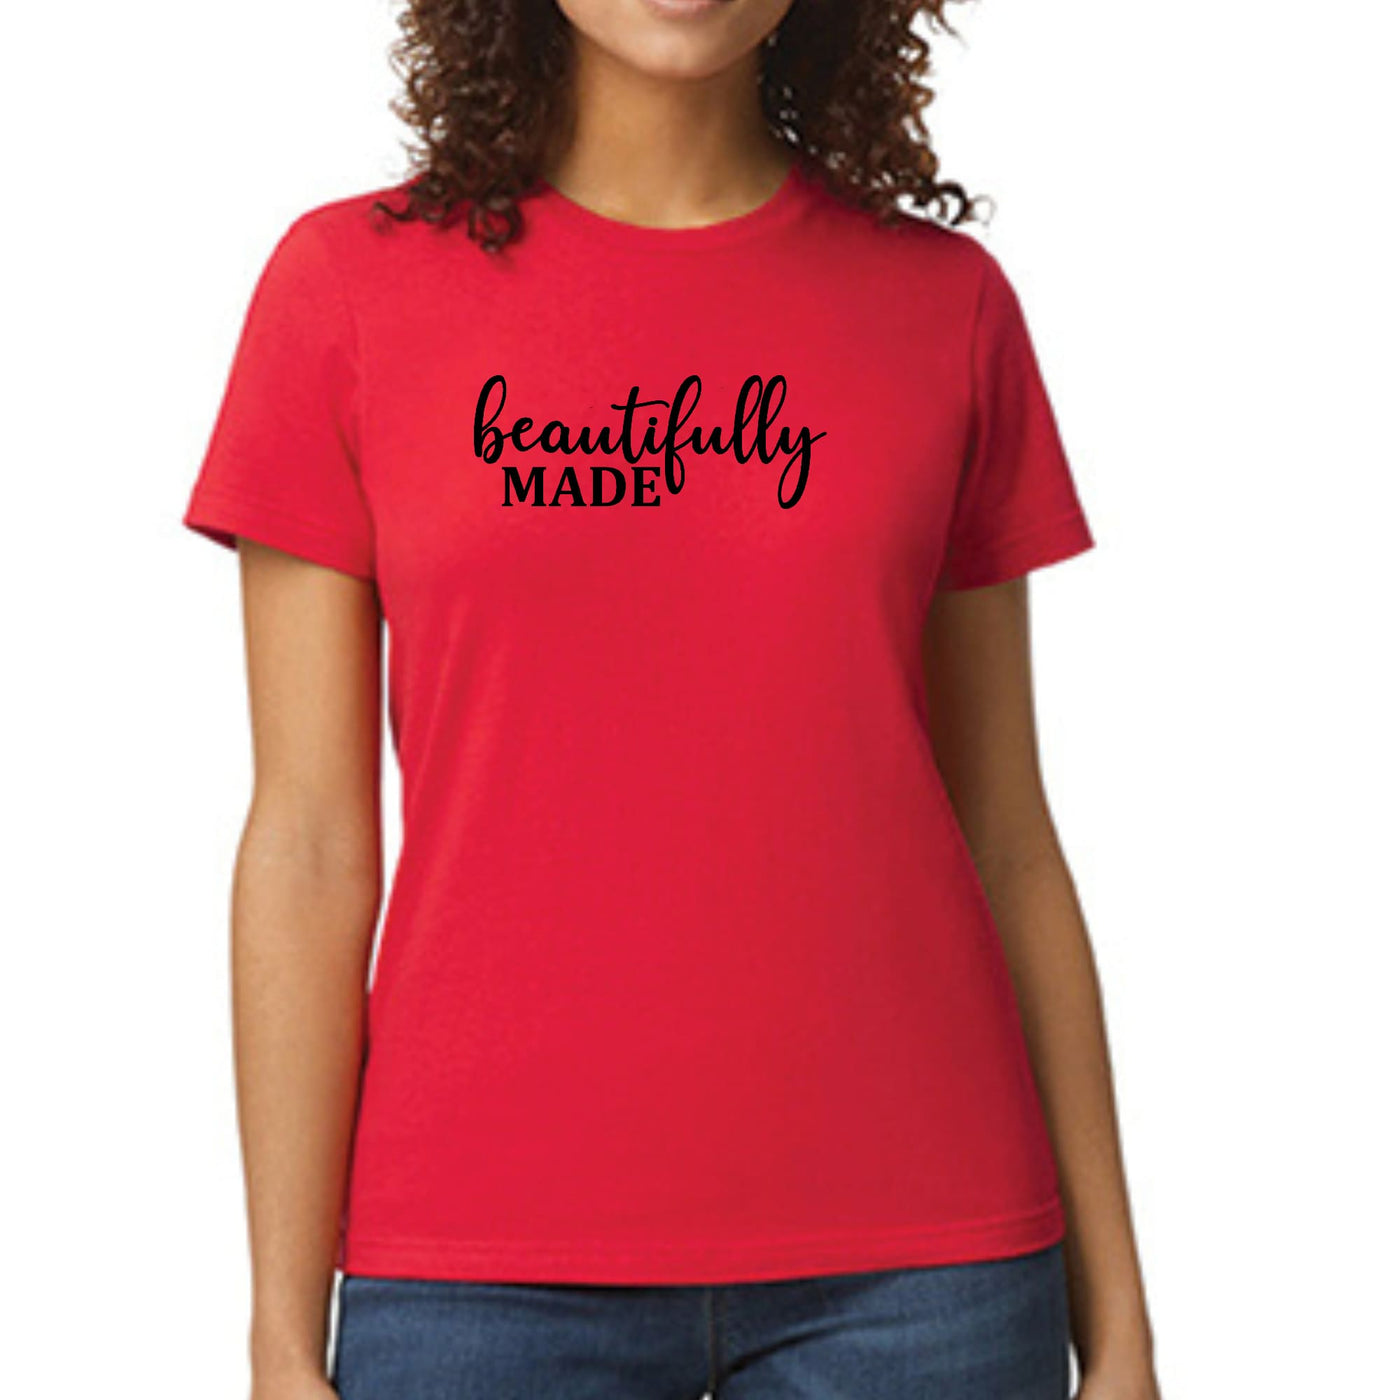 Womens Graphic T - shirt Beautifully Made - Inspiration Affirmation, | T